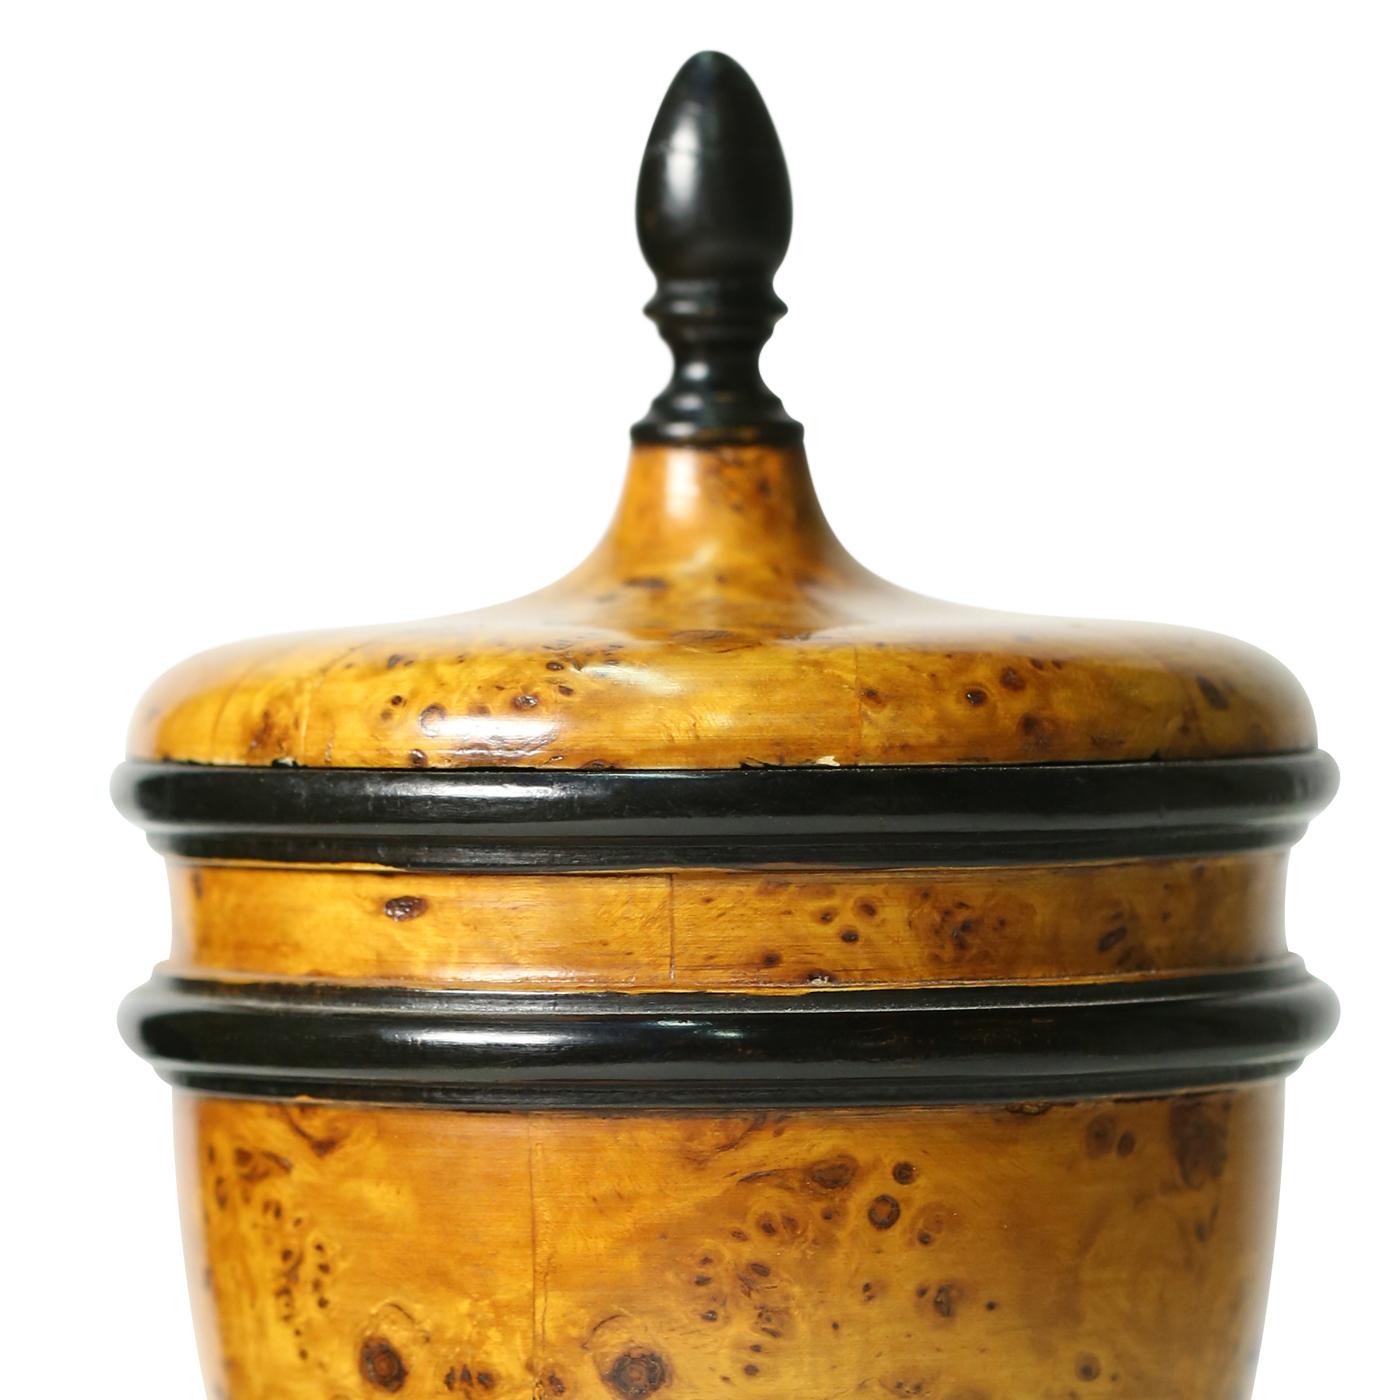 This is an elegant urn by Florentine wood carver Castorina. The piece is entirely handcrafted, creating the wood structure that is then covered with briar wood and polished to a brilliant finish using the traditional technique of Ferrara. The vase